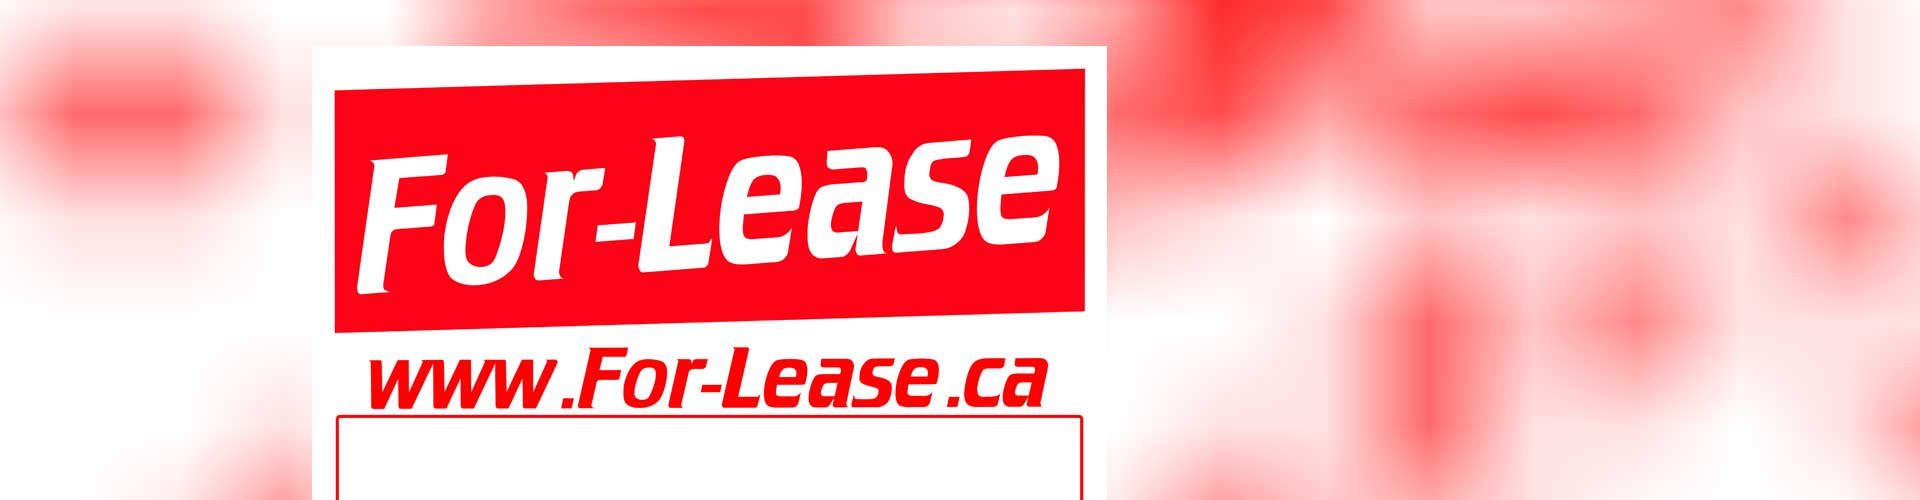 For-Lease.ca